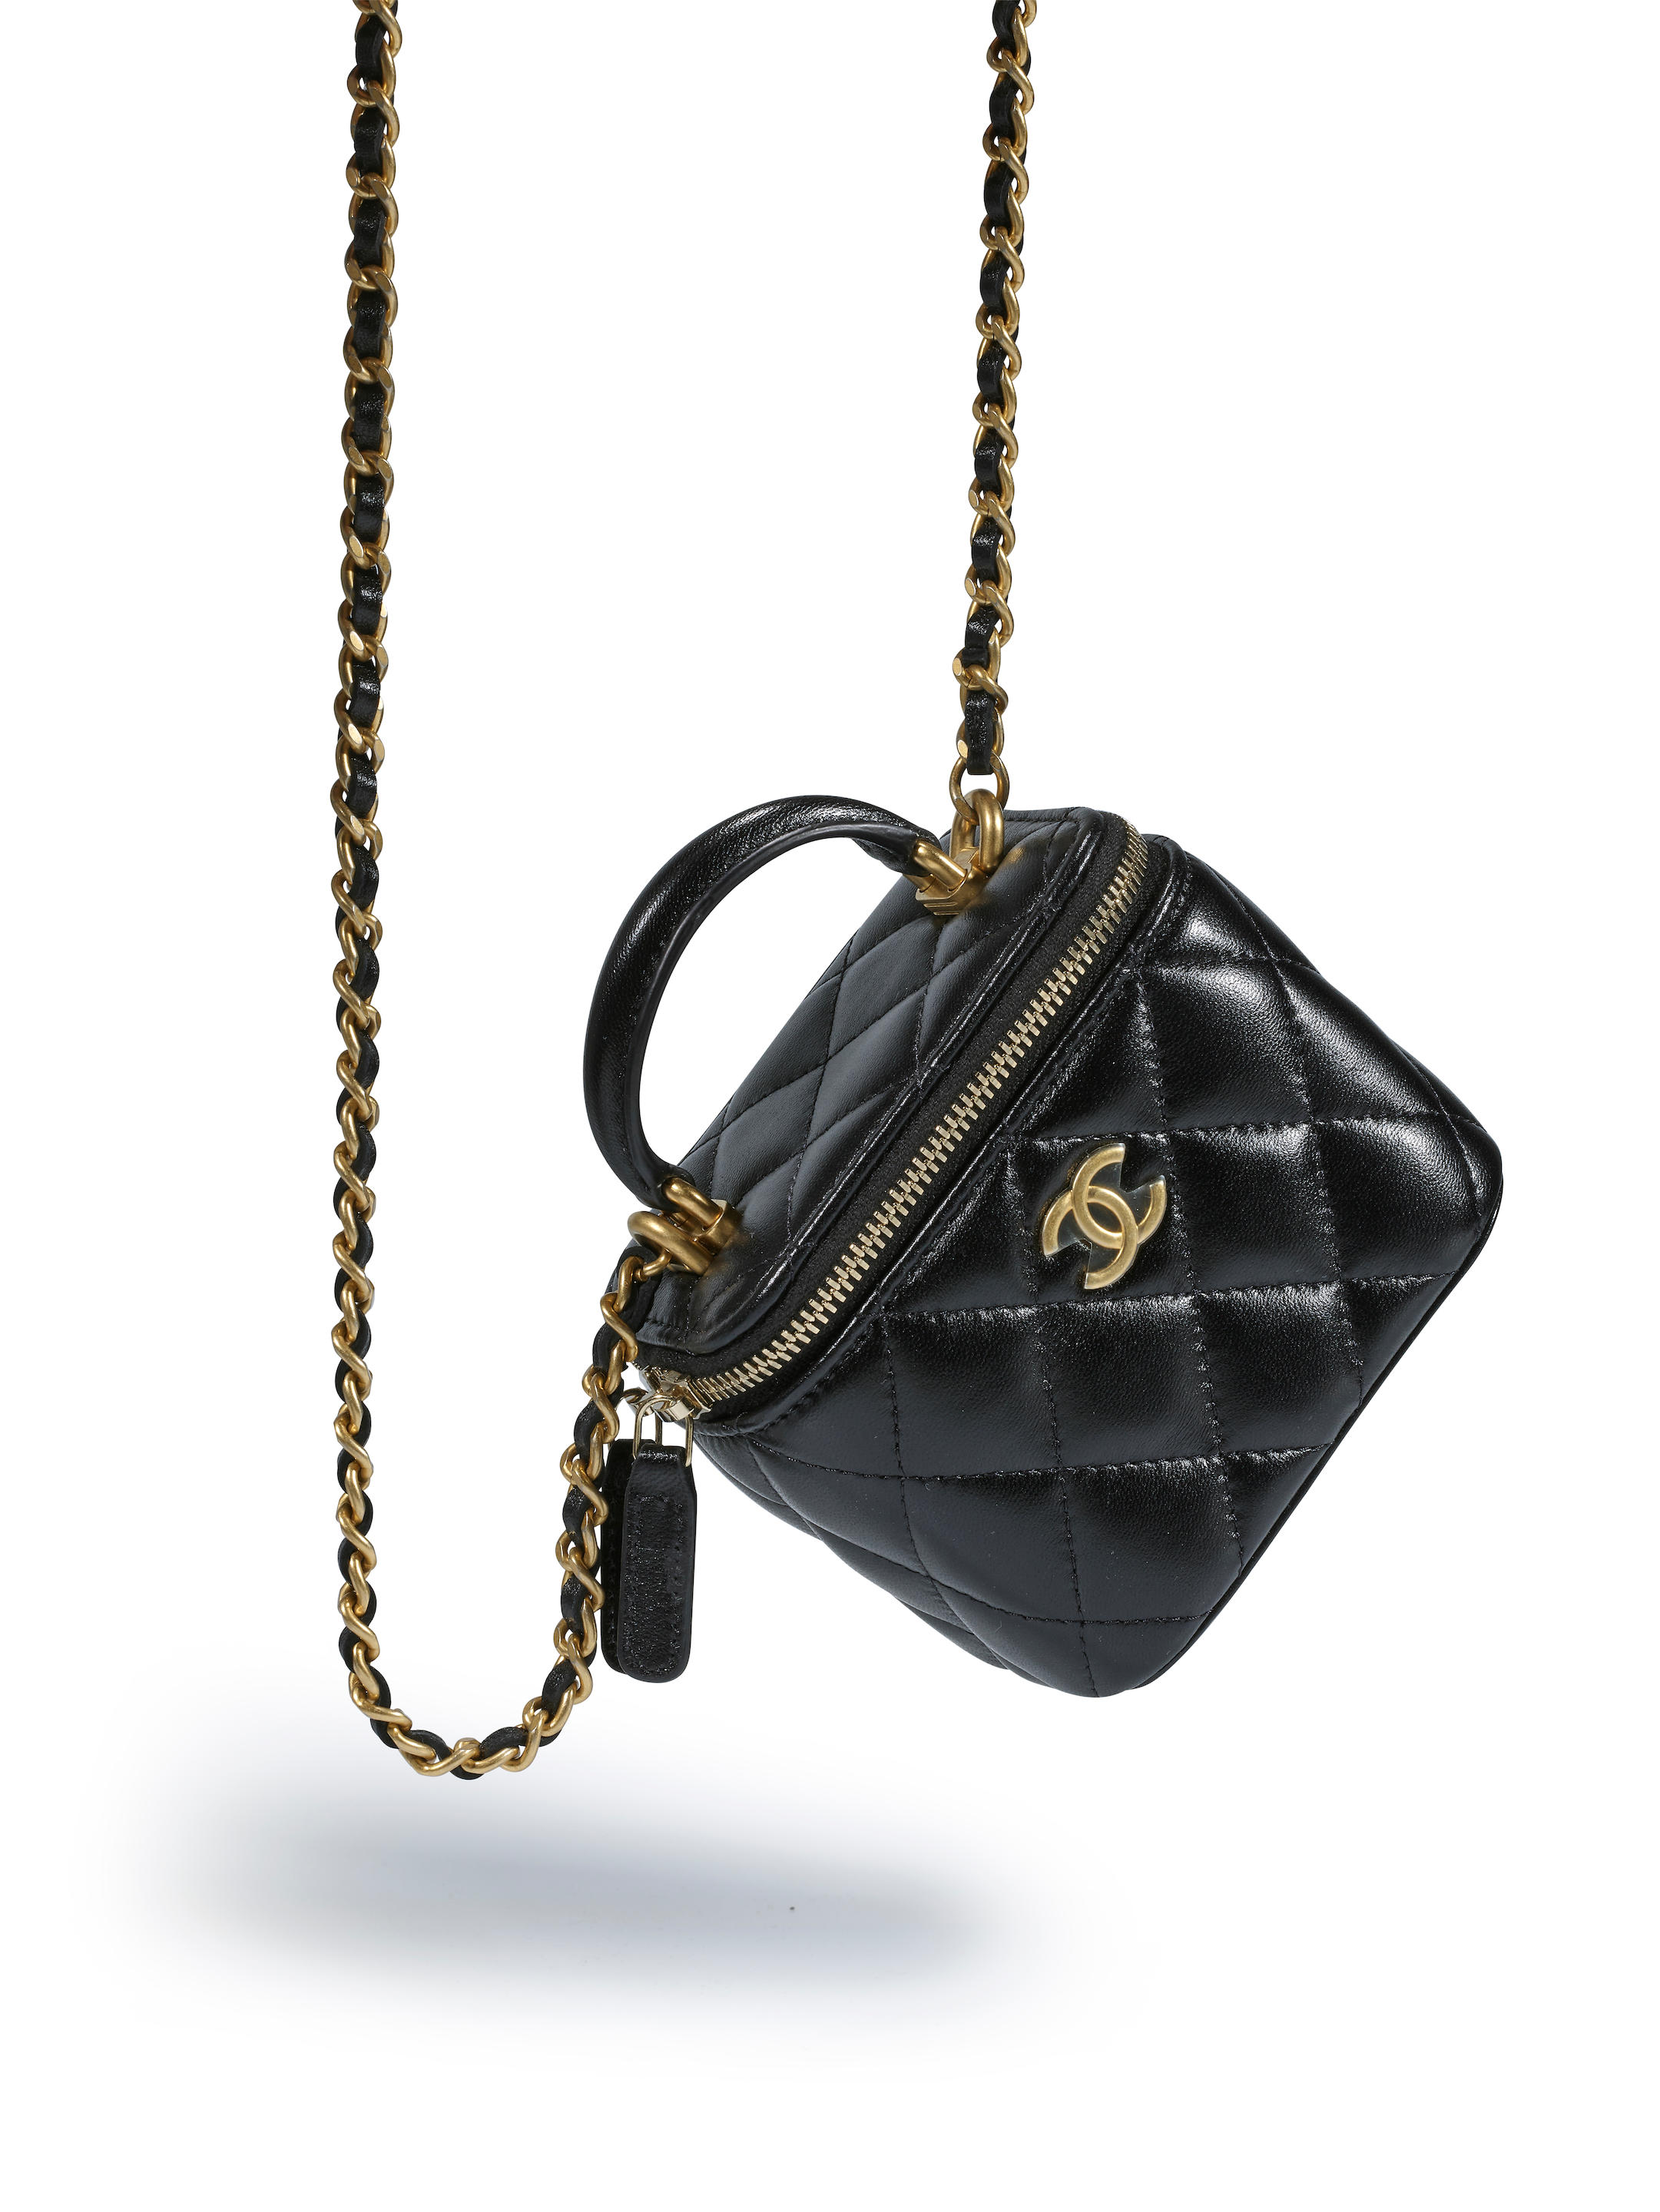 Bonhams : Chanel Black Lambskin Small Vanity Case with Gold Hardware  (includes dust bag and orignal box)